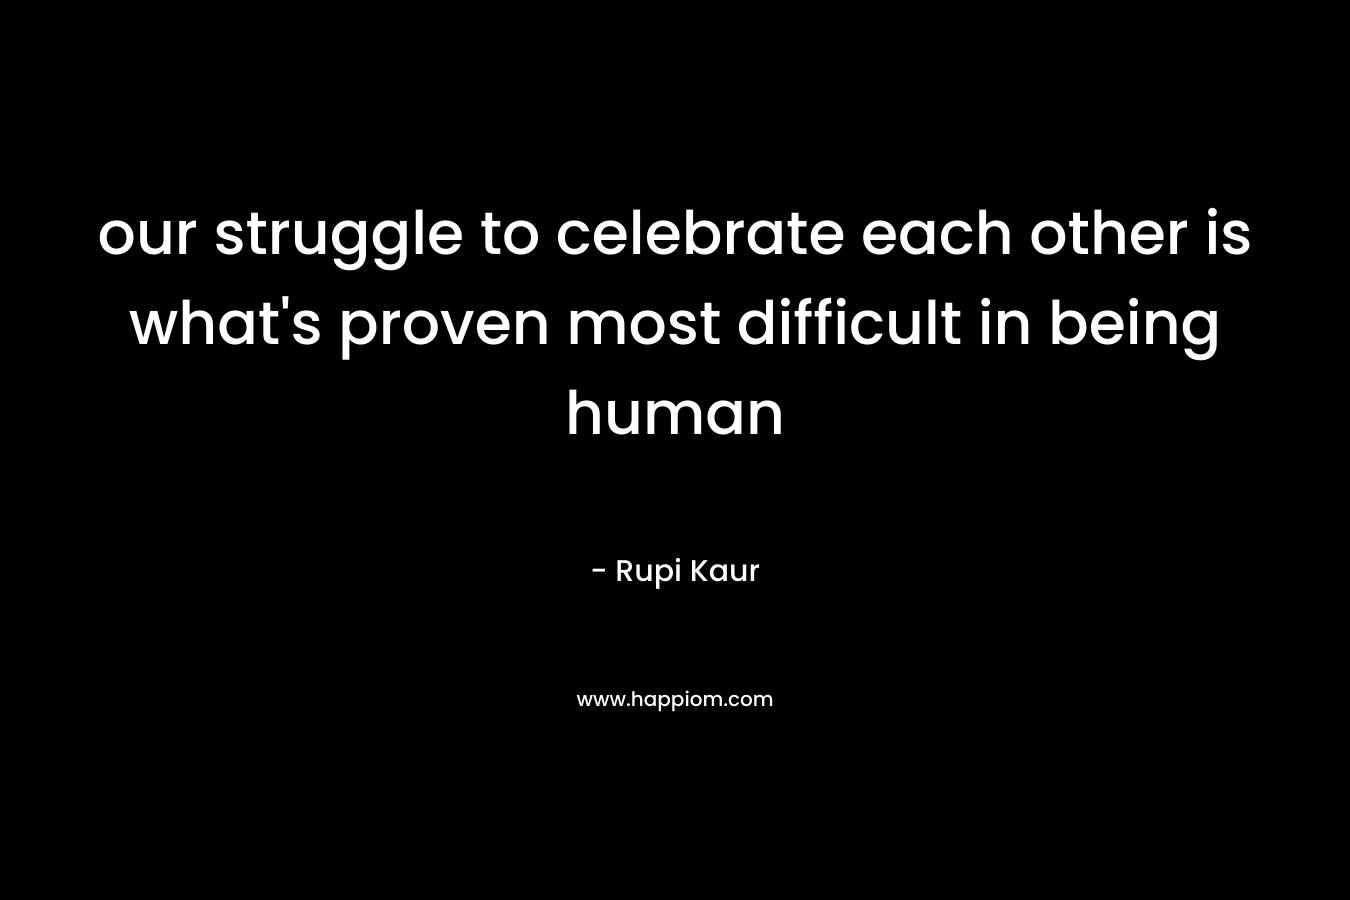 our struggle to celebrate each other is what's proven most difficult in being human